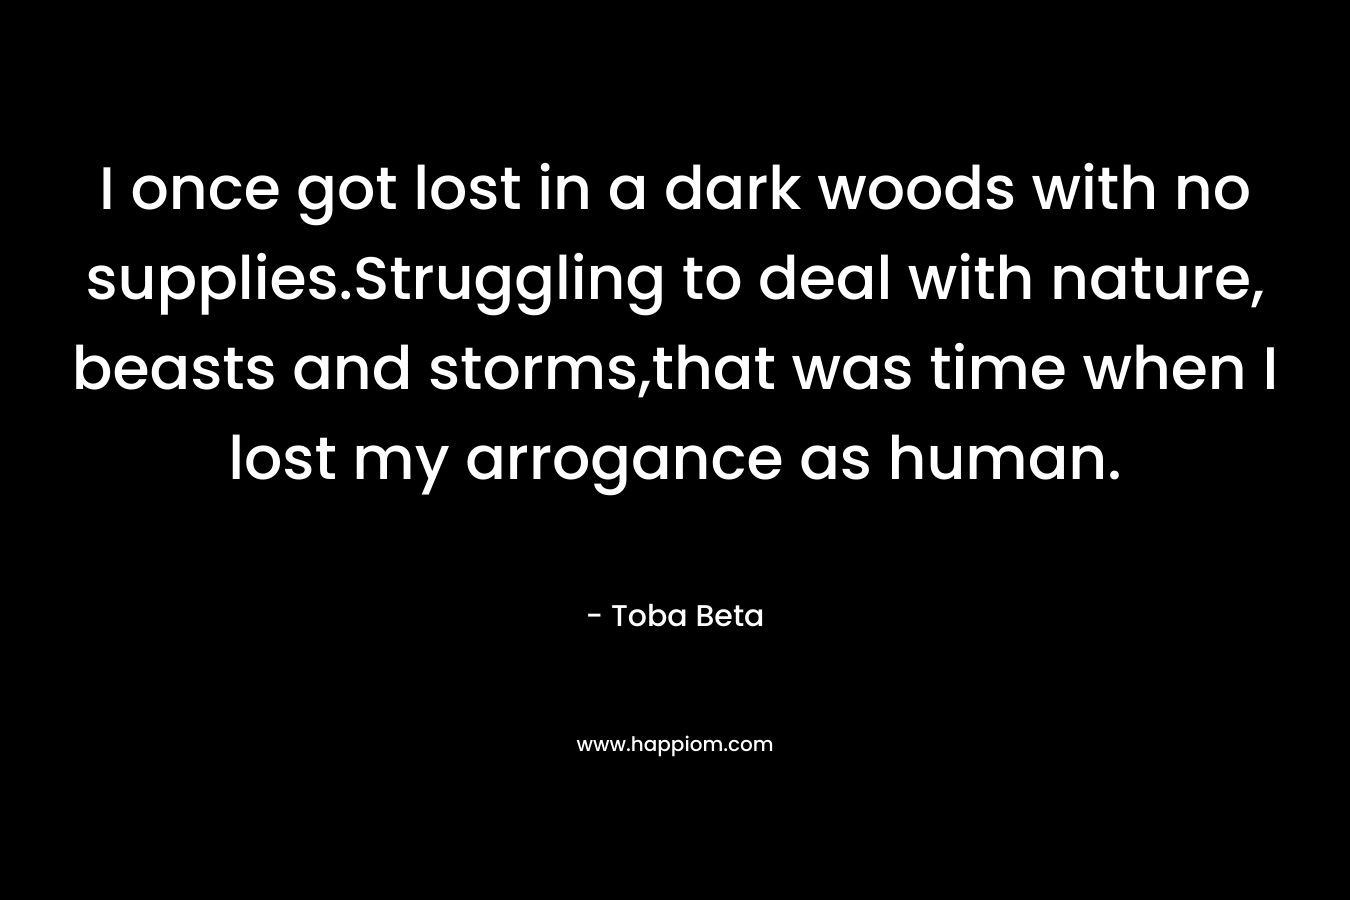 I once got lost in a dark woods with no supplies.Struggling to deal with nature, beasts and storms,that was time when I lost my arrogance as human. – Toba Beta